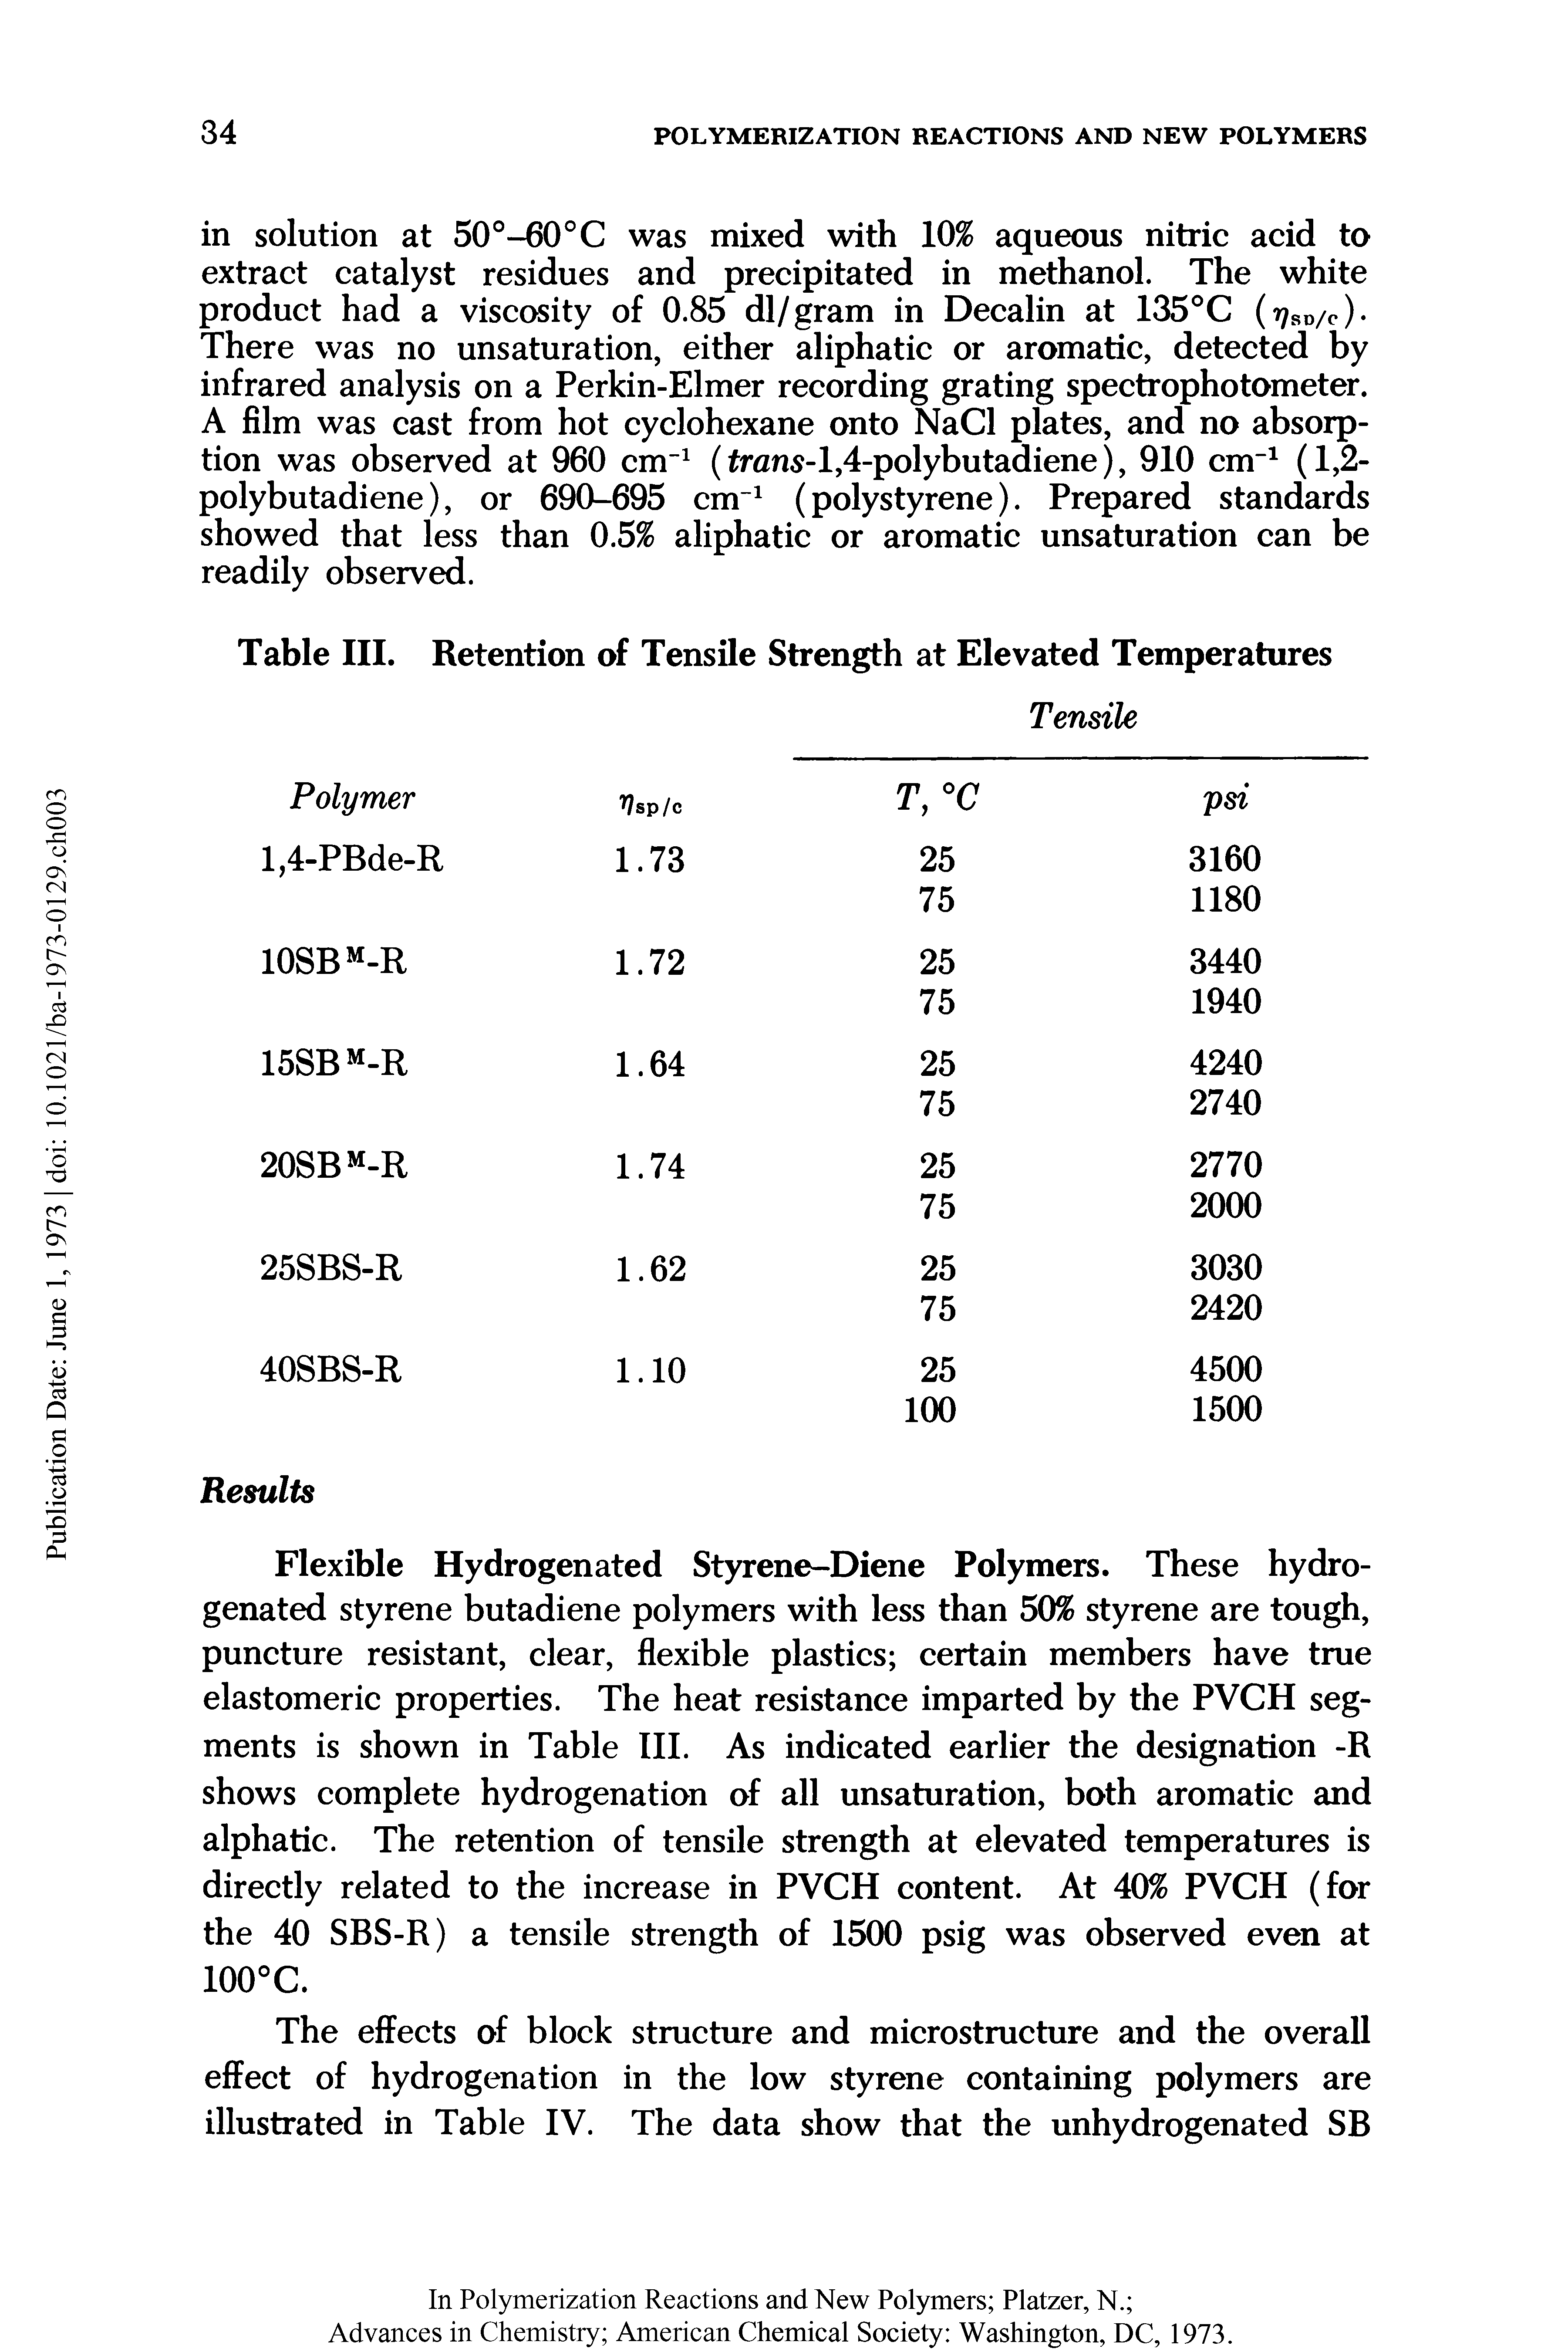 Table III. Retention of Tensile Strength at Elevated Temperatures...